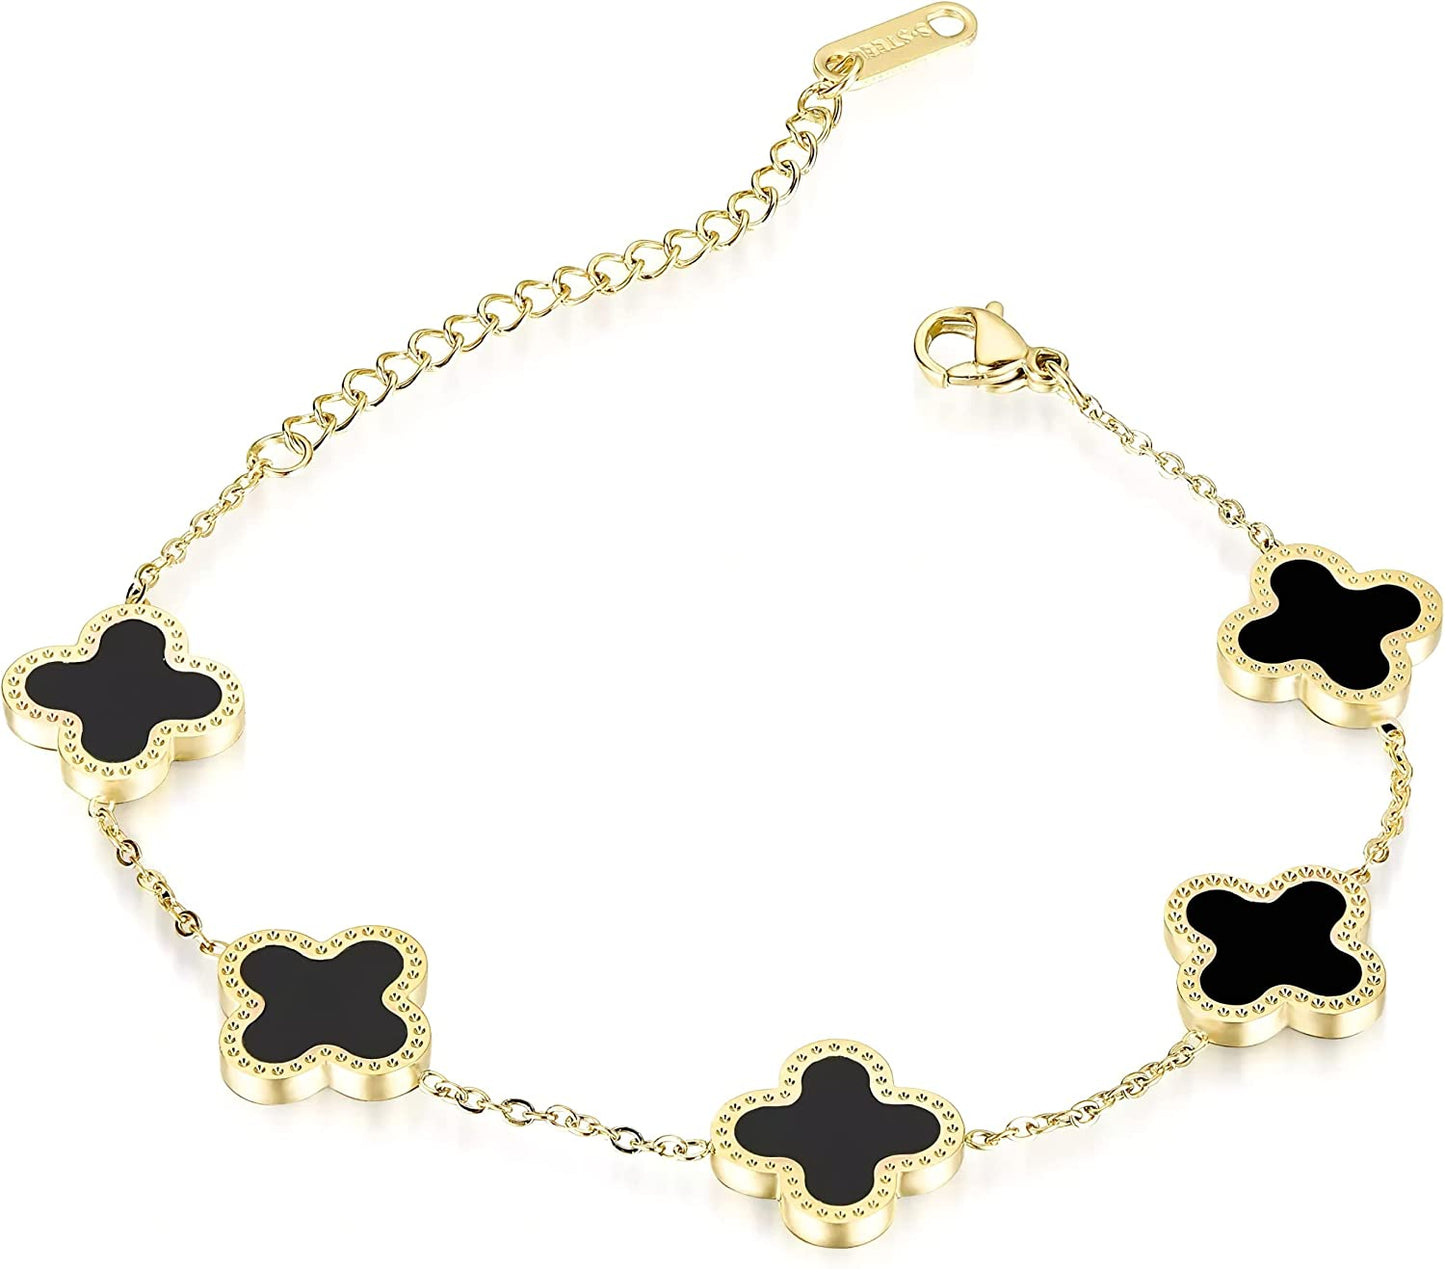 Four Leaf Clover Bracelet for Women 18K Gold Plated Stainless Steel Lucky 4 Leaf Link Bracelet Wrist Jewelry for Mother and Daughter (Black Gold)